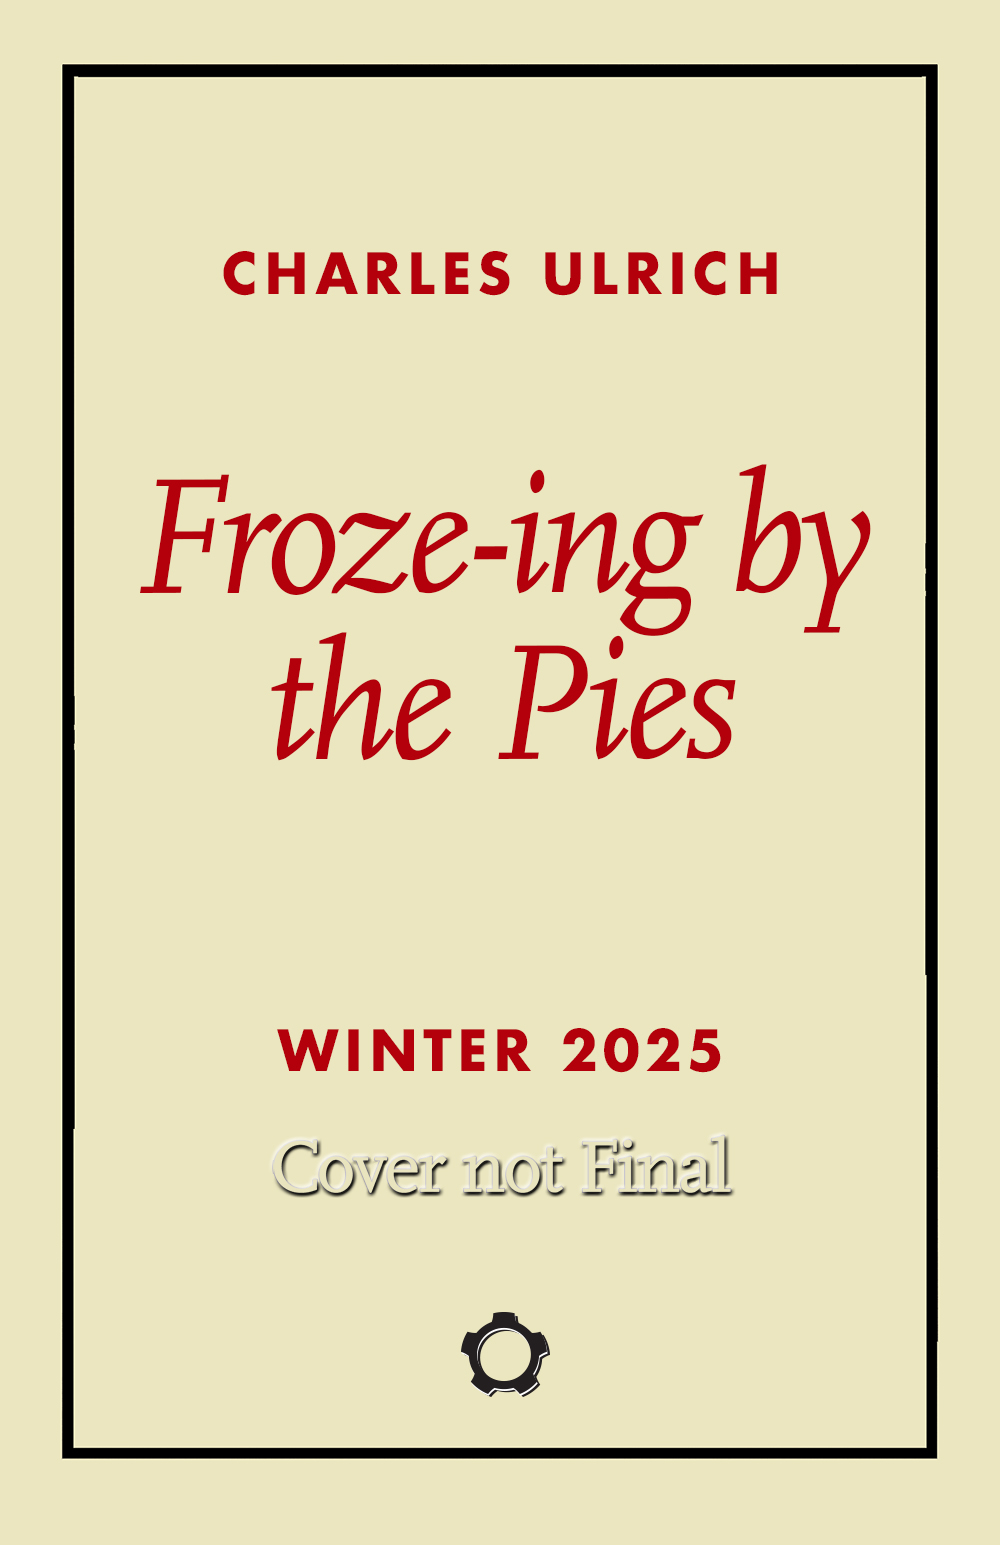 Froze-ing by the Pies by Charles Ulrich